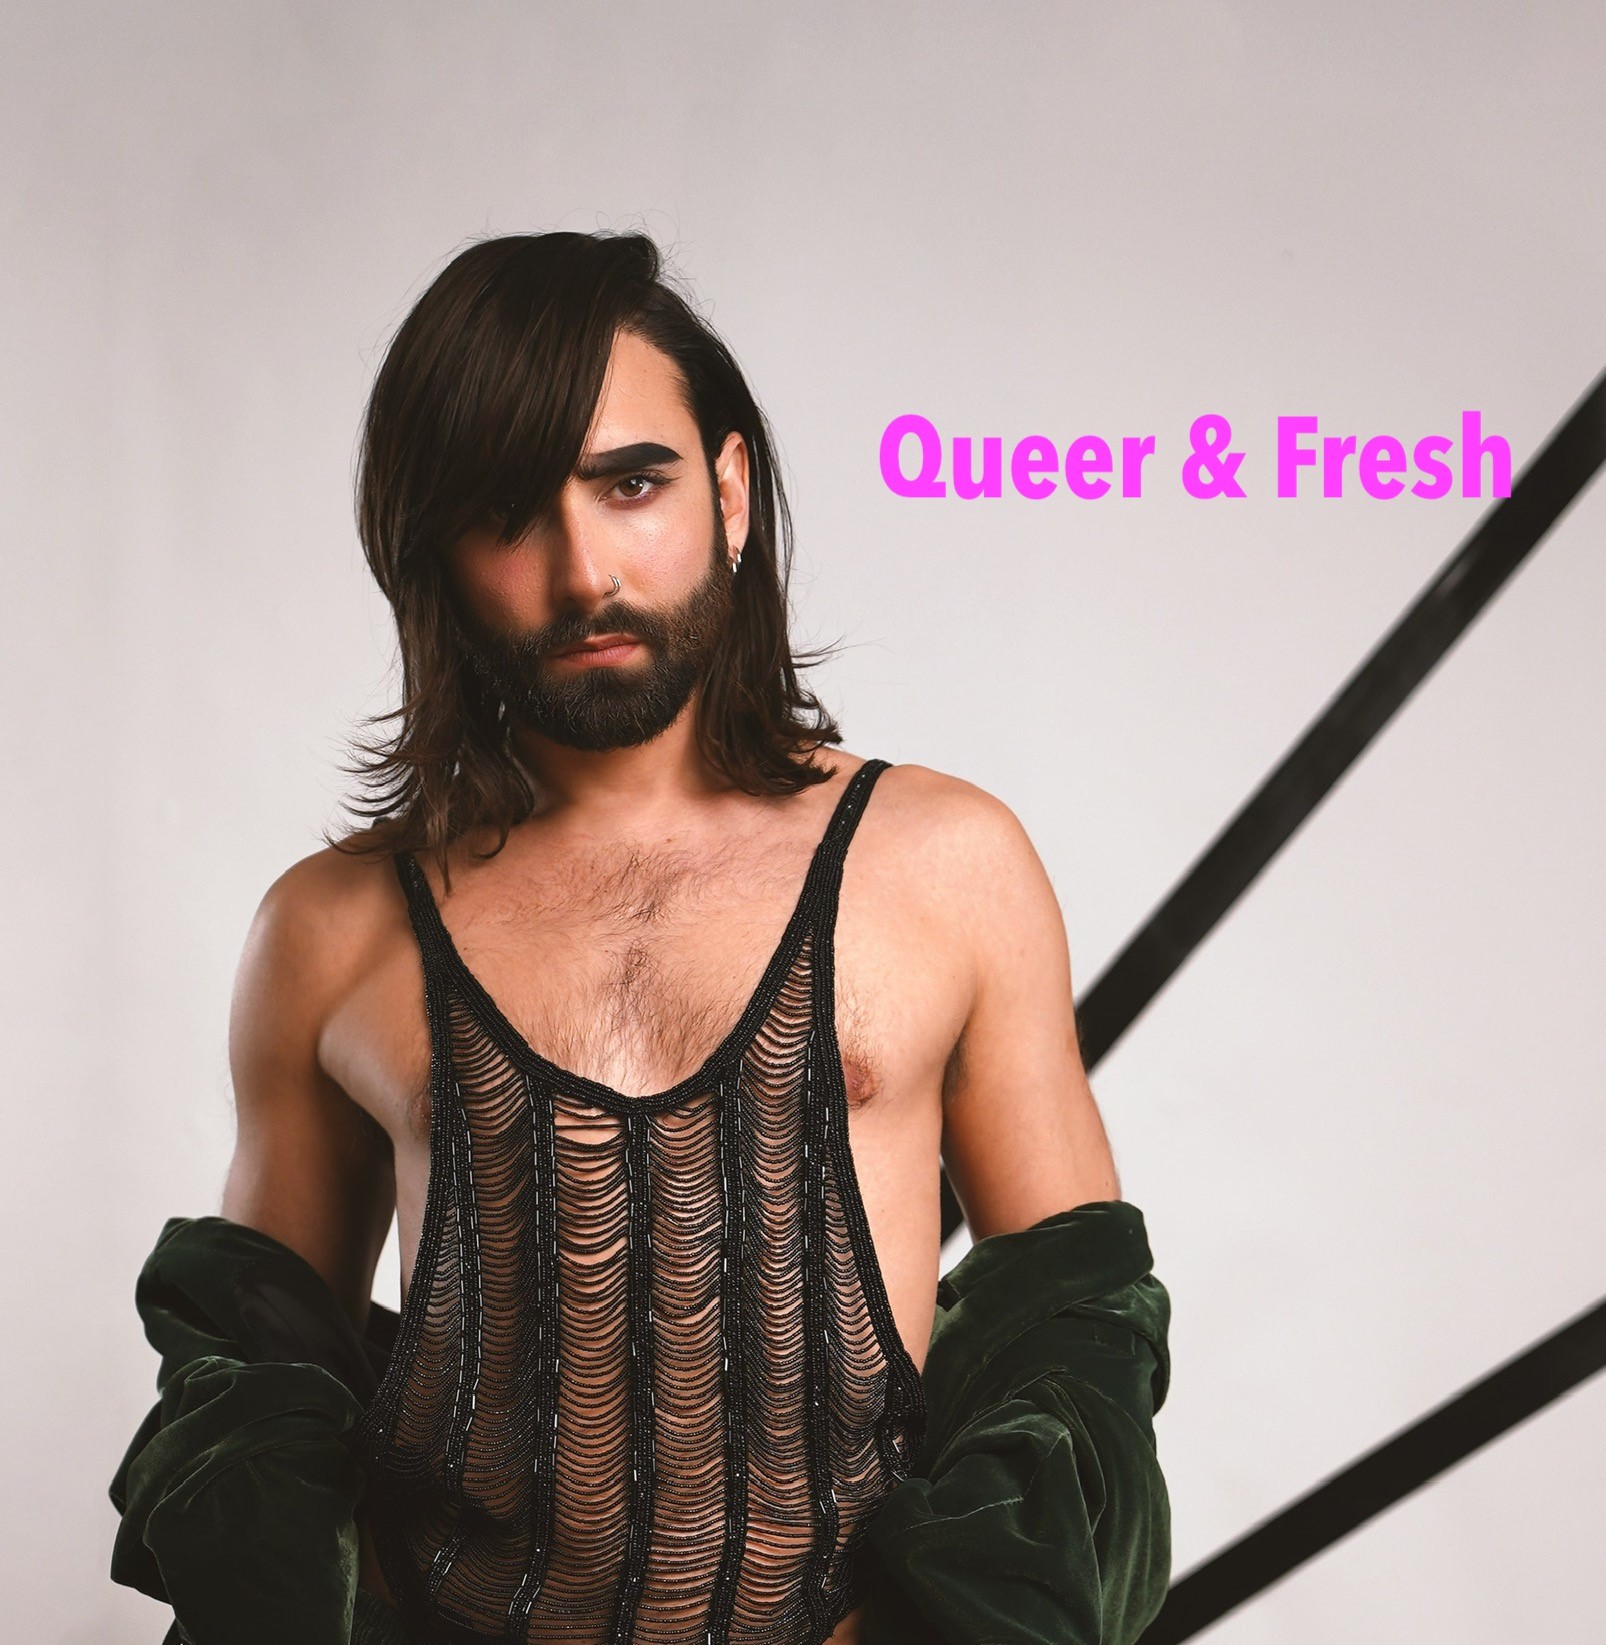 QUEER & FRESH - Newcomers hosted by Conchita Wurst